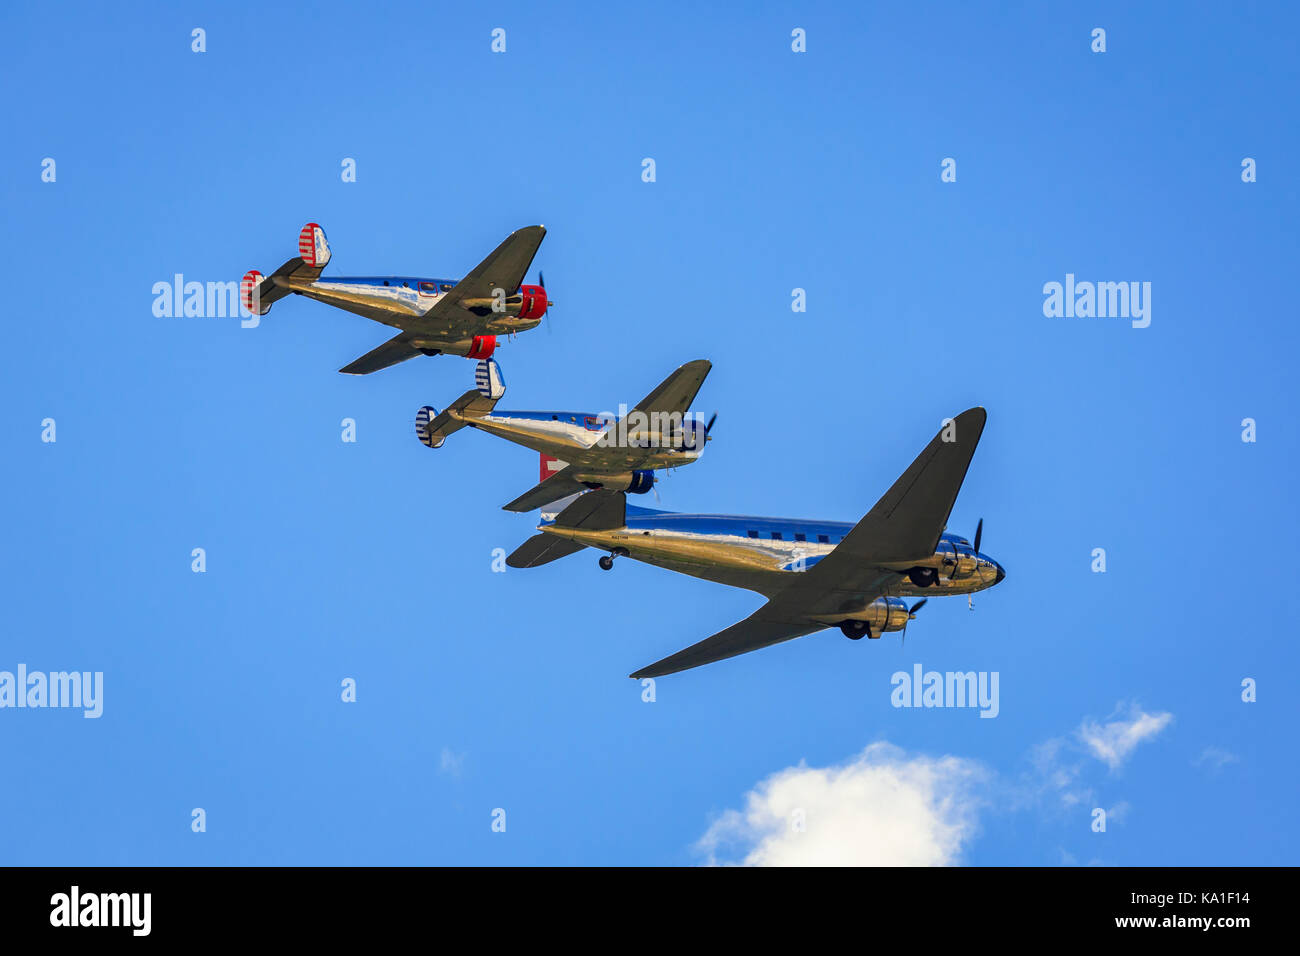 Breitling classic formation, Beech-18 and Douglas DC-3, Sion Airshow, Sion, Valais, Switzerland Stock Photo